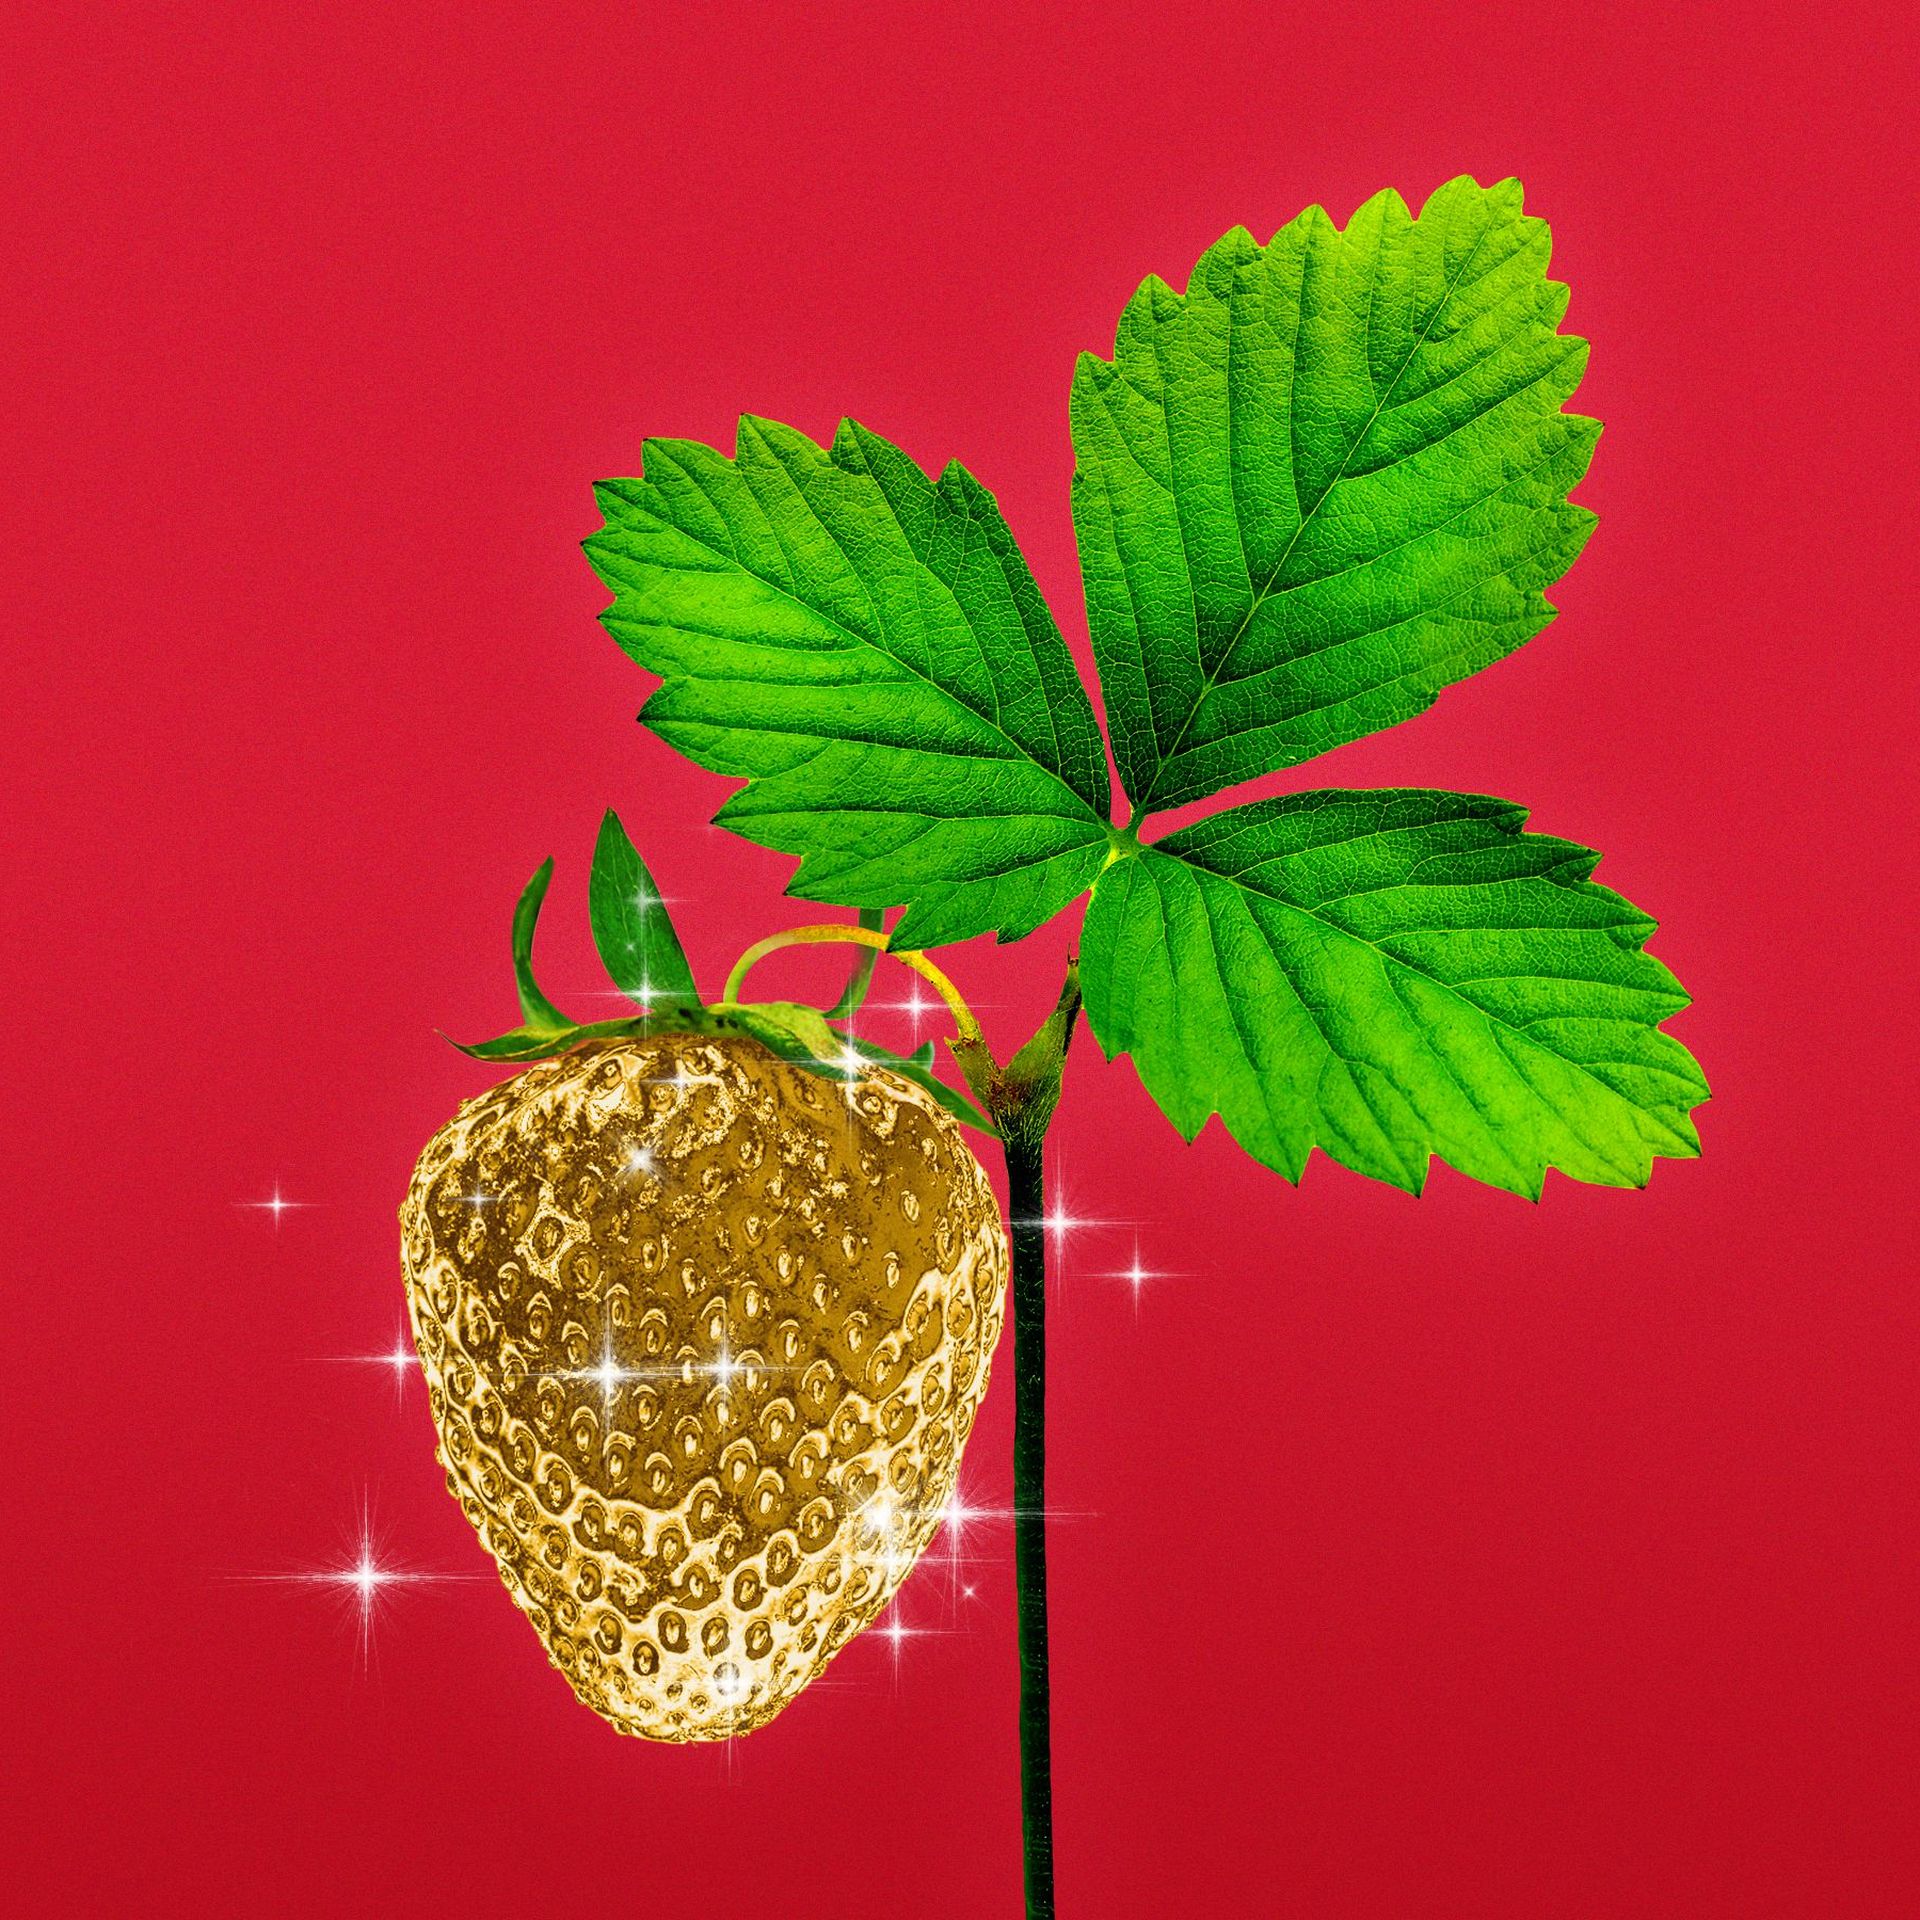 Illustration of a golden strawberry.